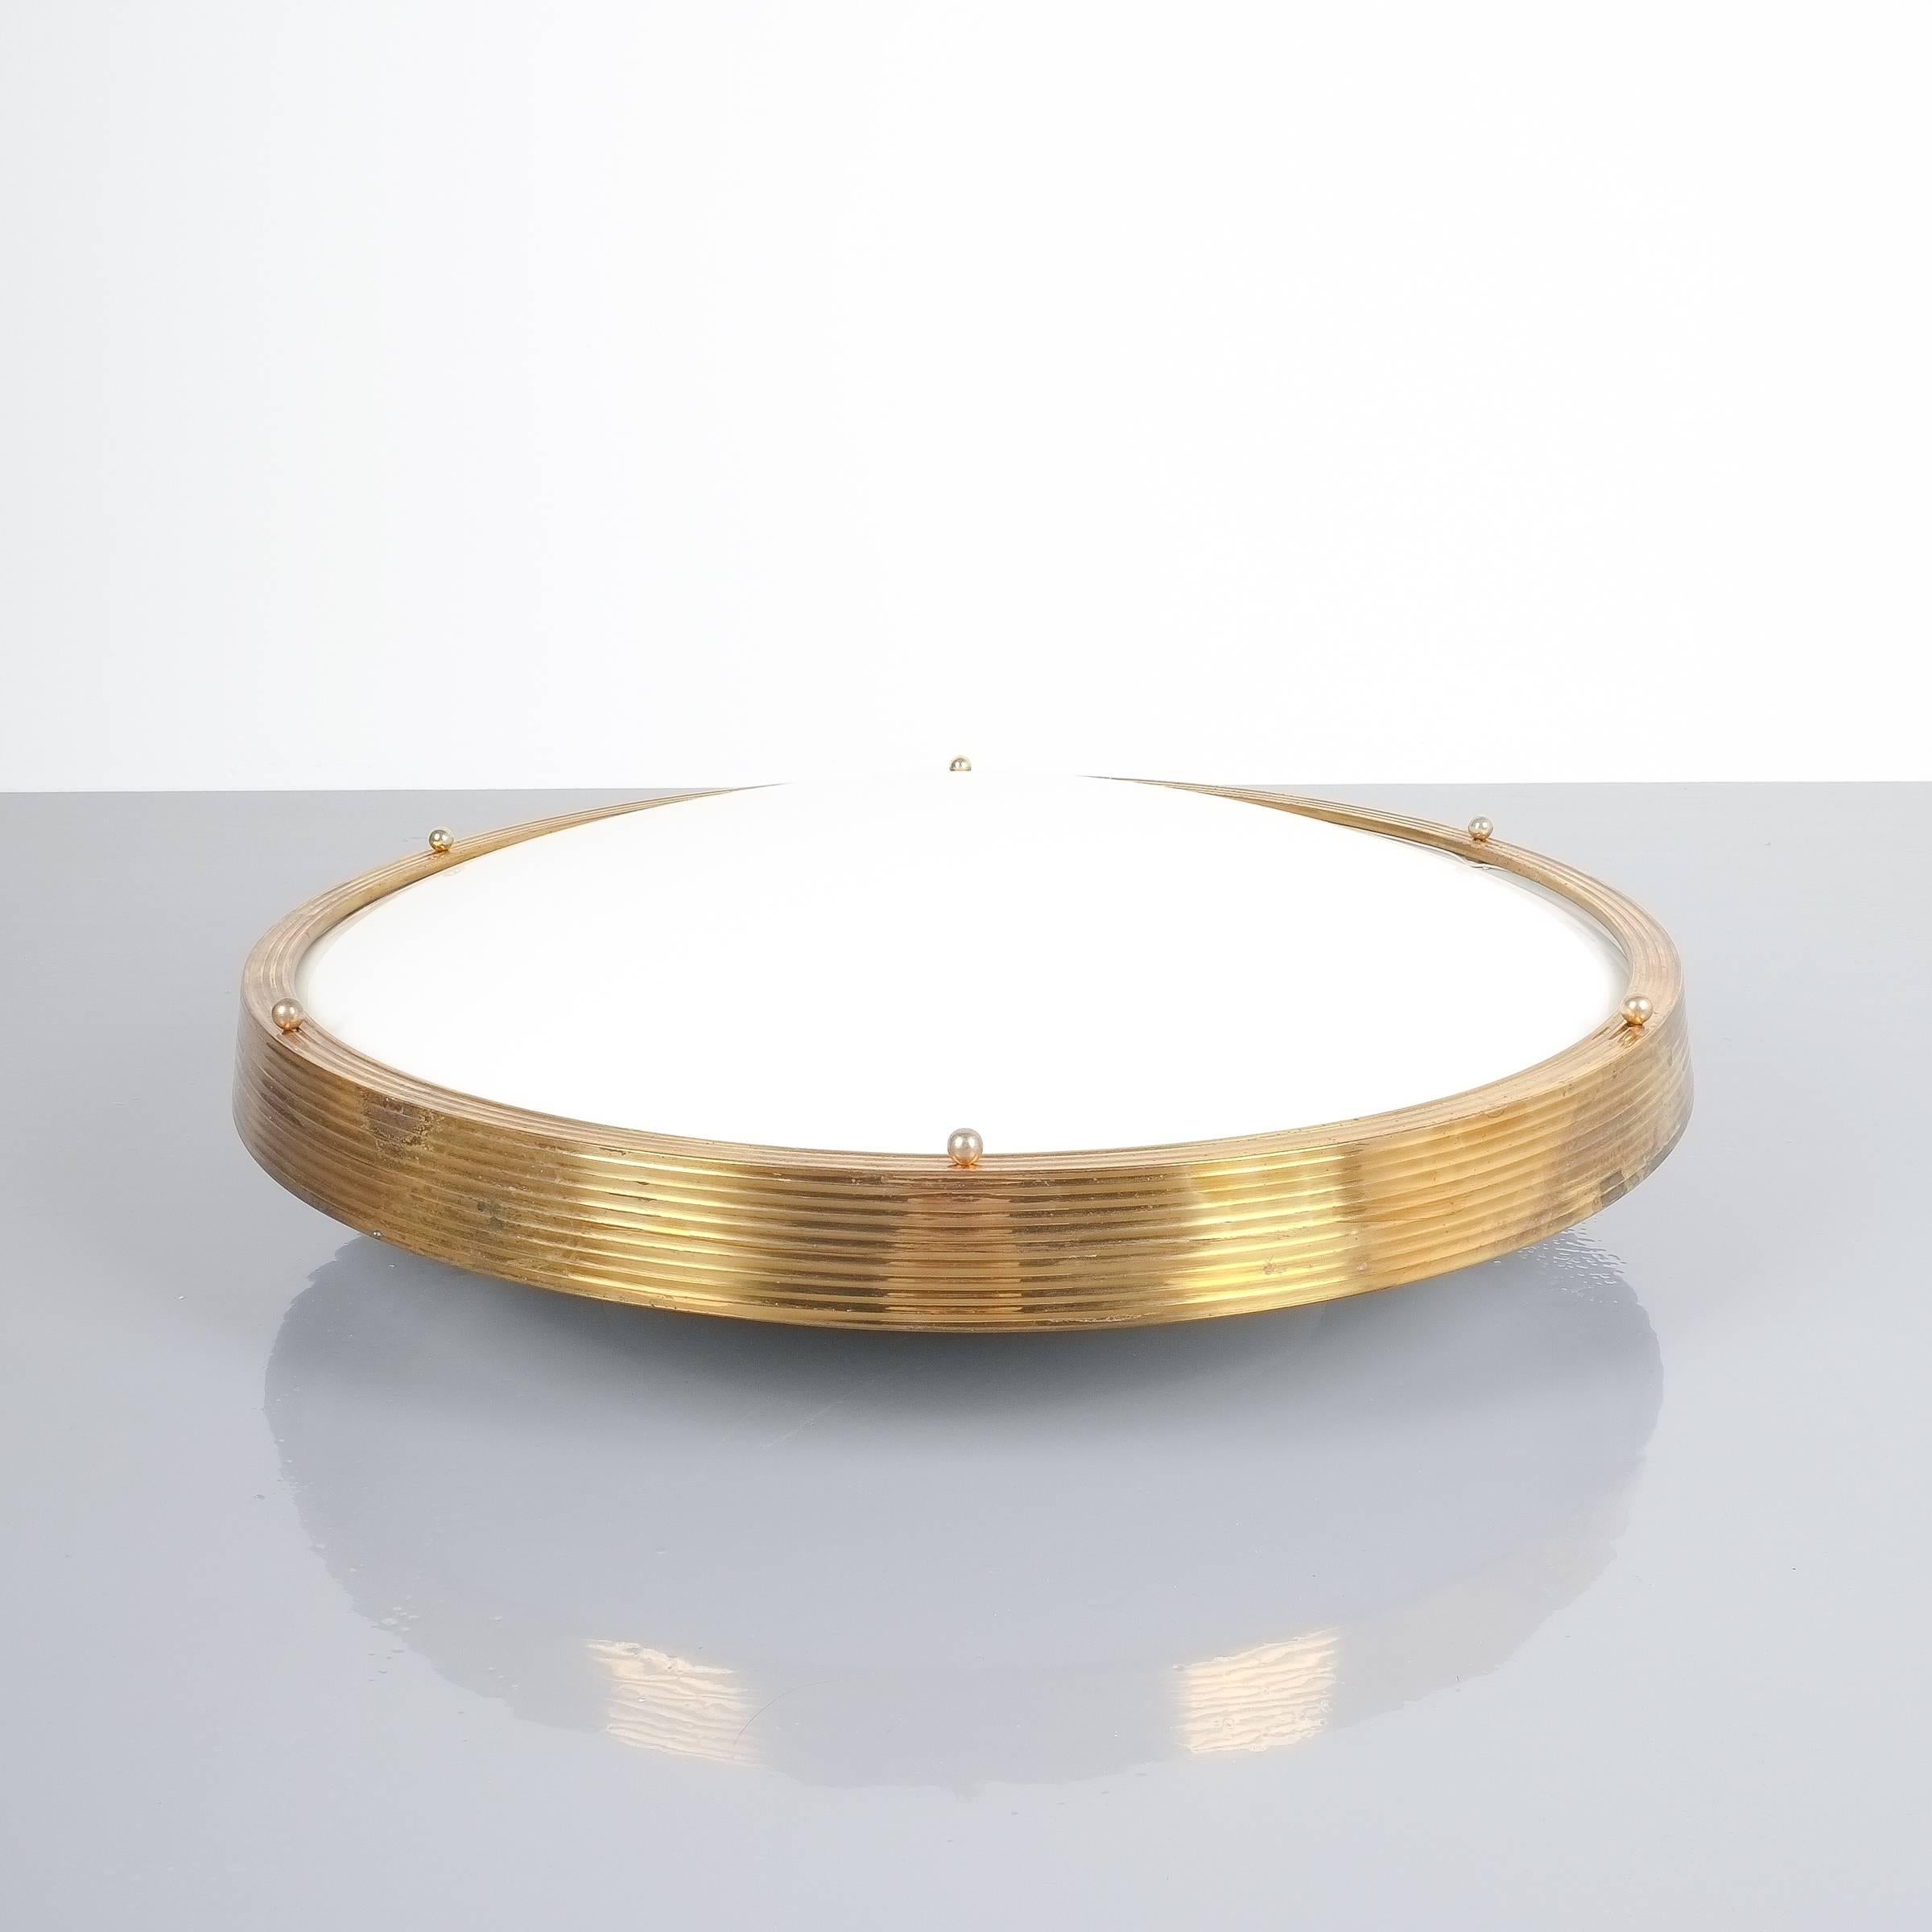 Large Lucite brass cinema ceiling flush mount lamp, France, 1950. With 26.4 inches in diameter and 4x e27 bulbs this light is illuminating beautifully emitting a soft tone light. It is featuring a large Lucite dome shaped shade and a patinated brass